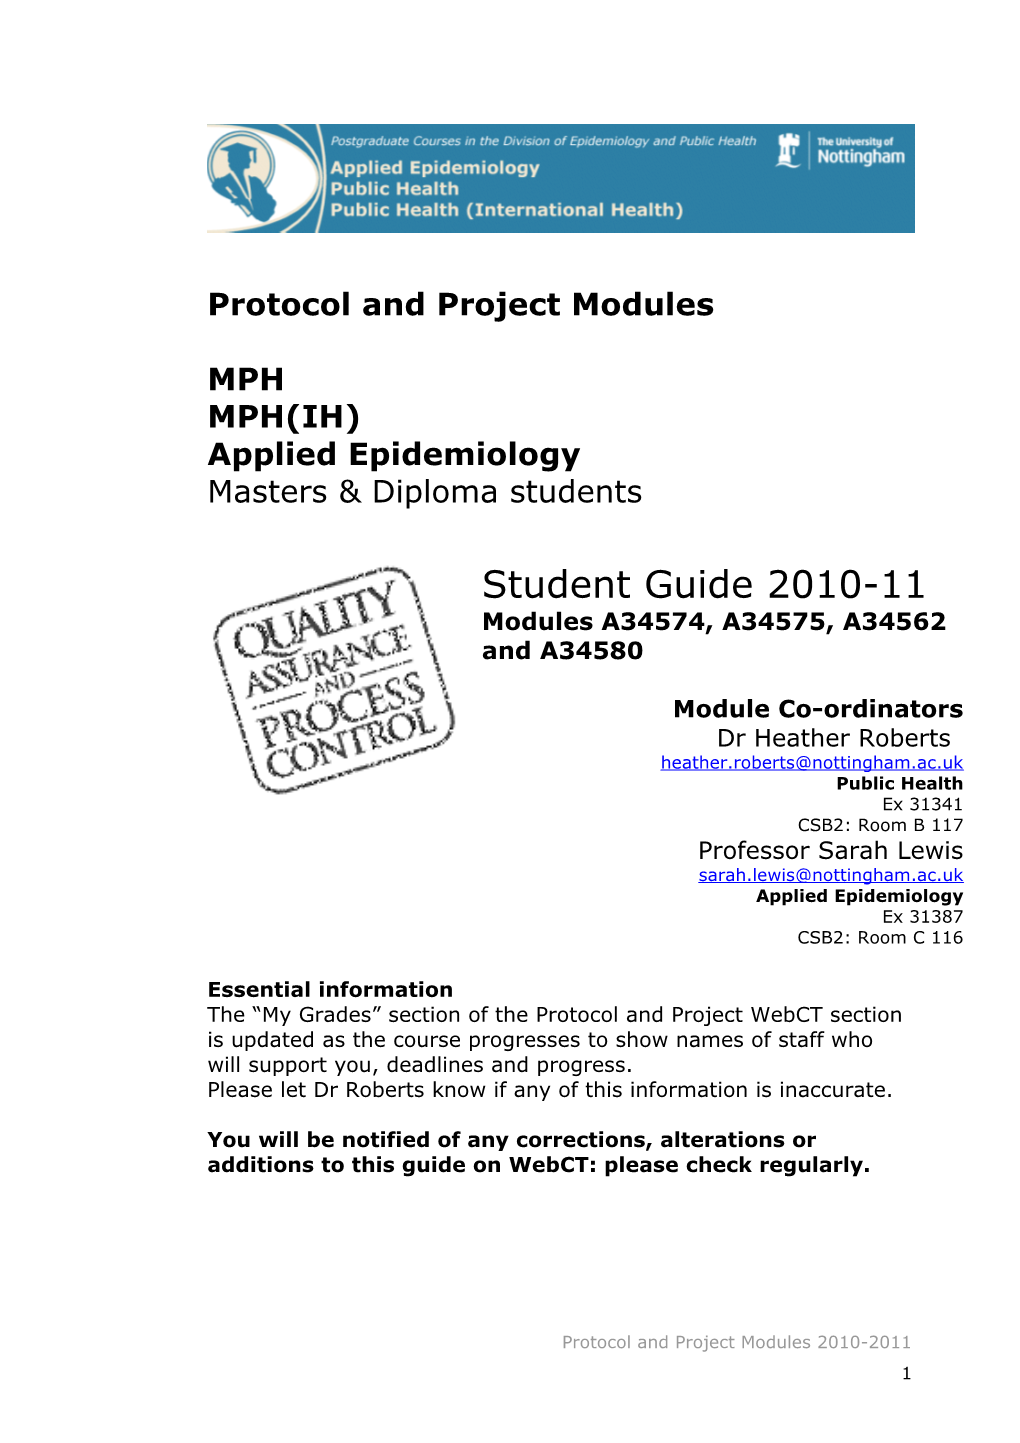 Protocol and Project Modules